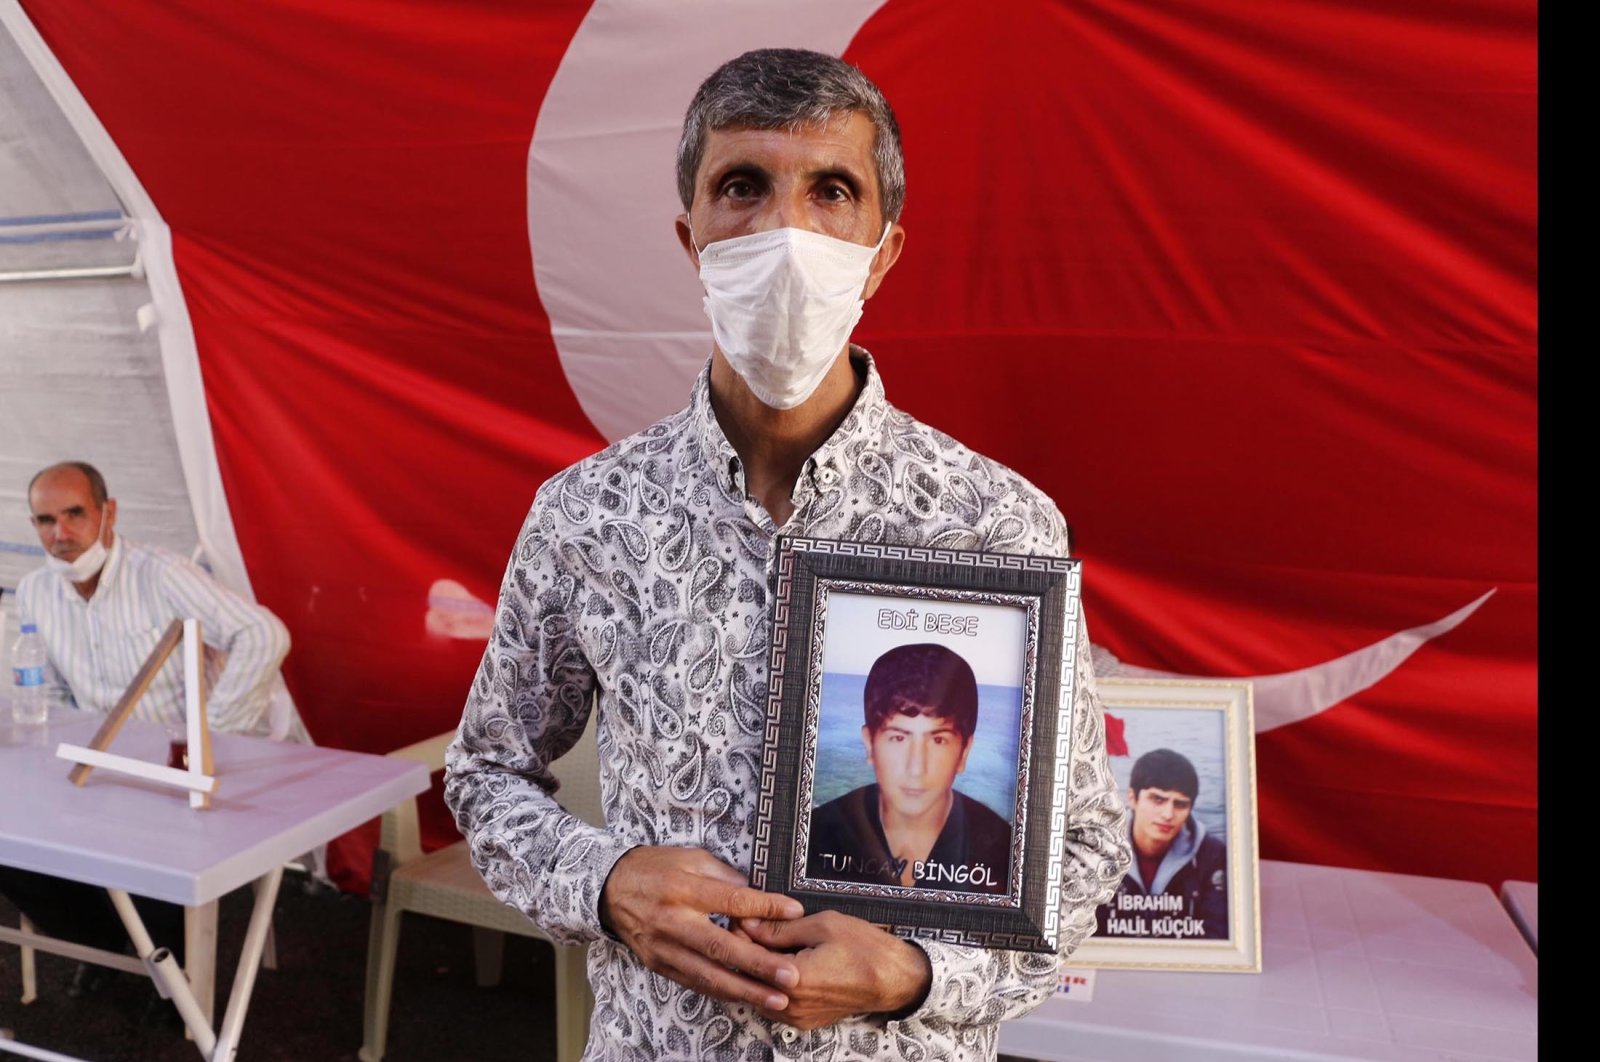 Father Şevket Bingöl holds a picture of his son Tuncay, who was abducted to fight for the PKK terrorists in 2014, Diyarbakır, Turkey, Aug. 6, 2021. (DHA Photo)